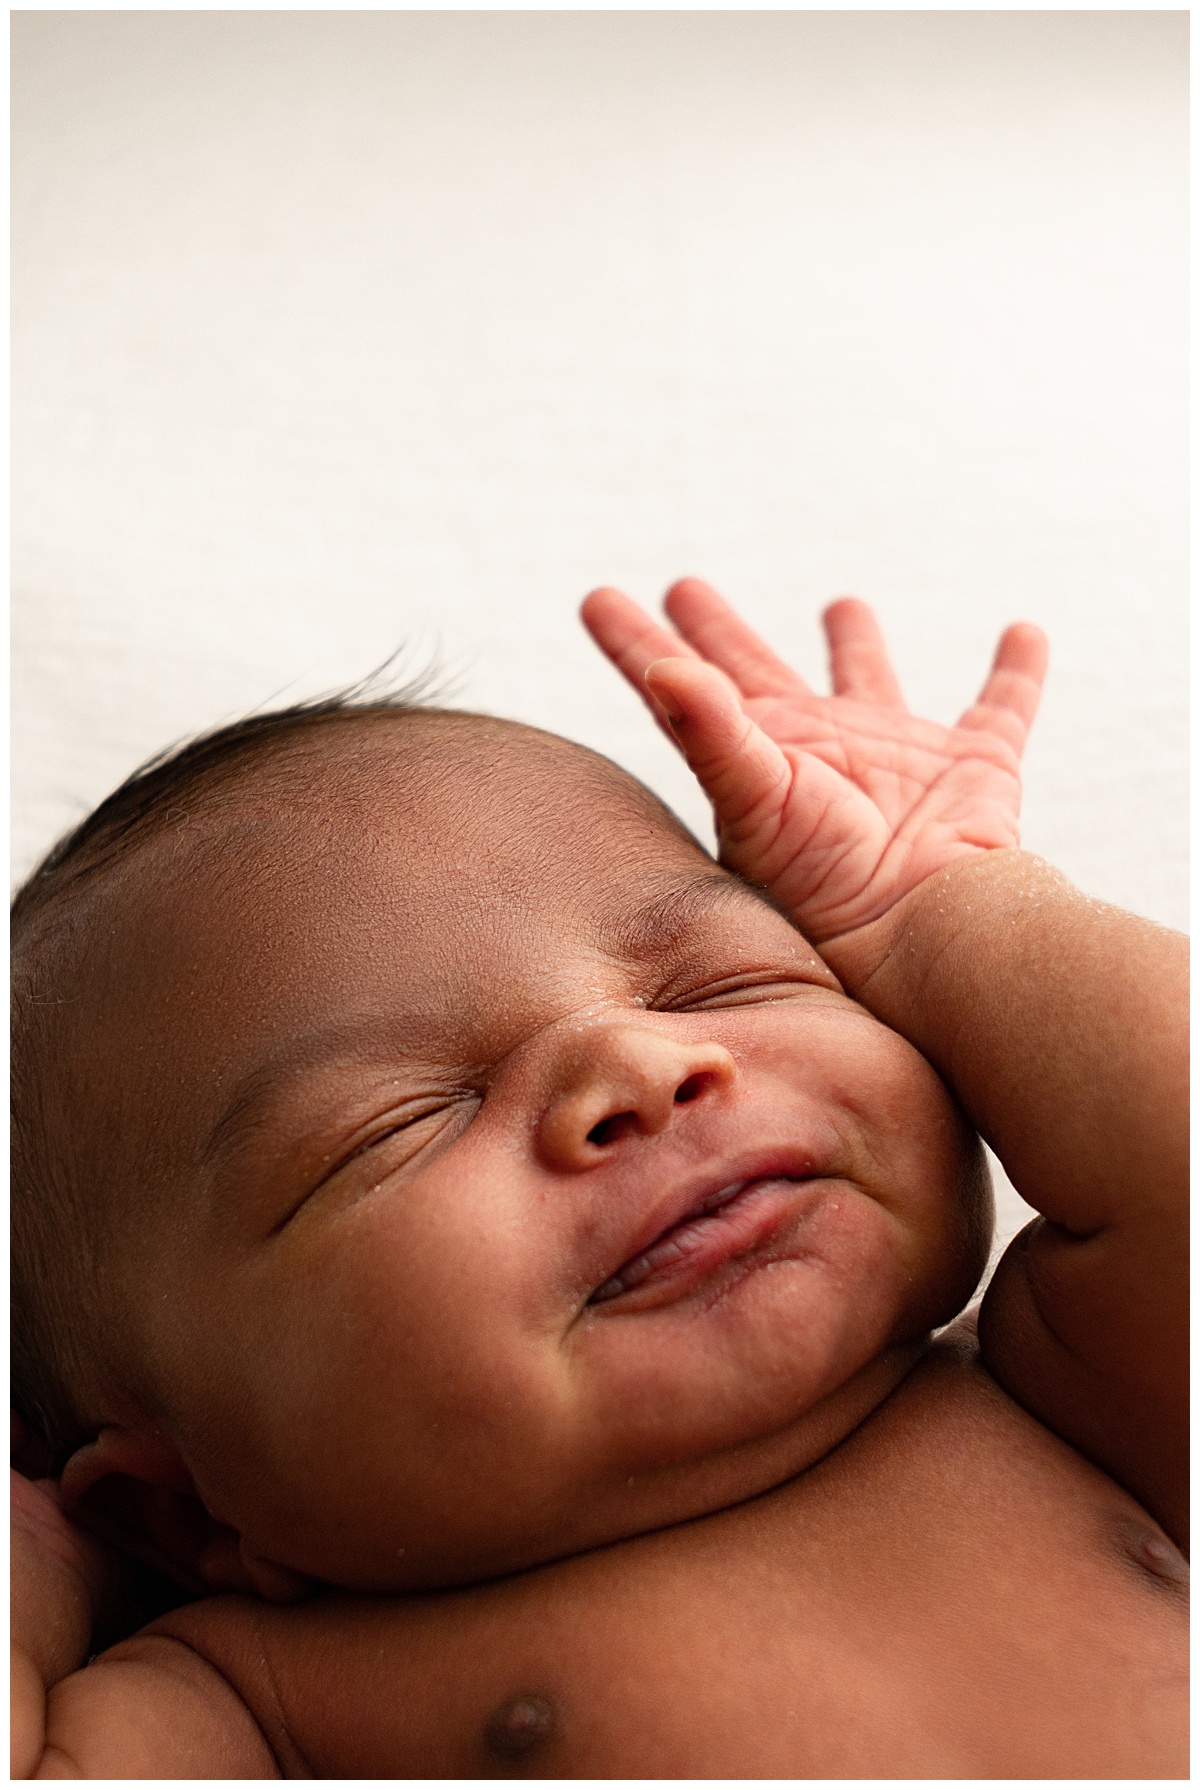 Baby has tiny hands by face for Norma Fayak Photography